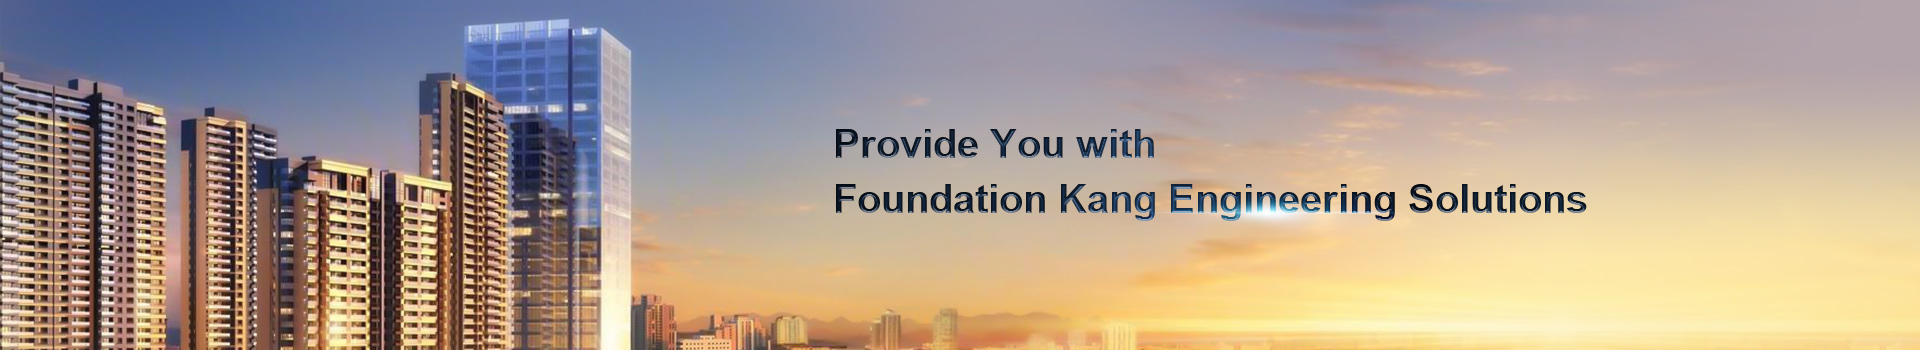 Provide You with Foundation Kang Engineering Solutions